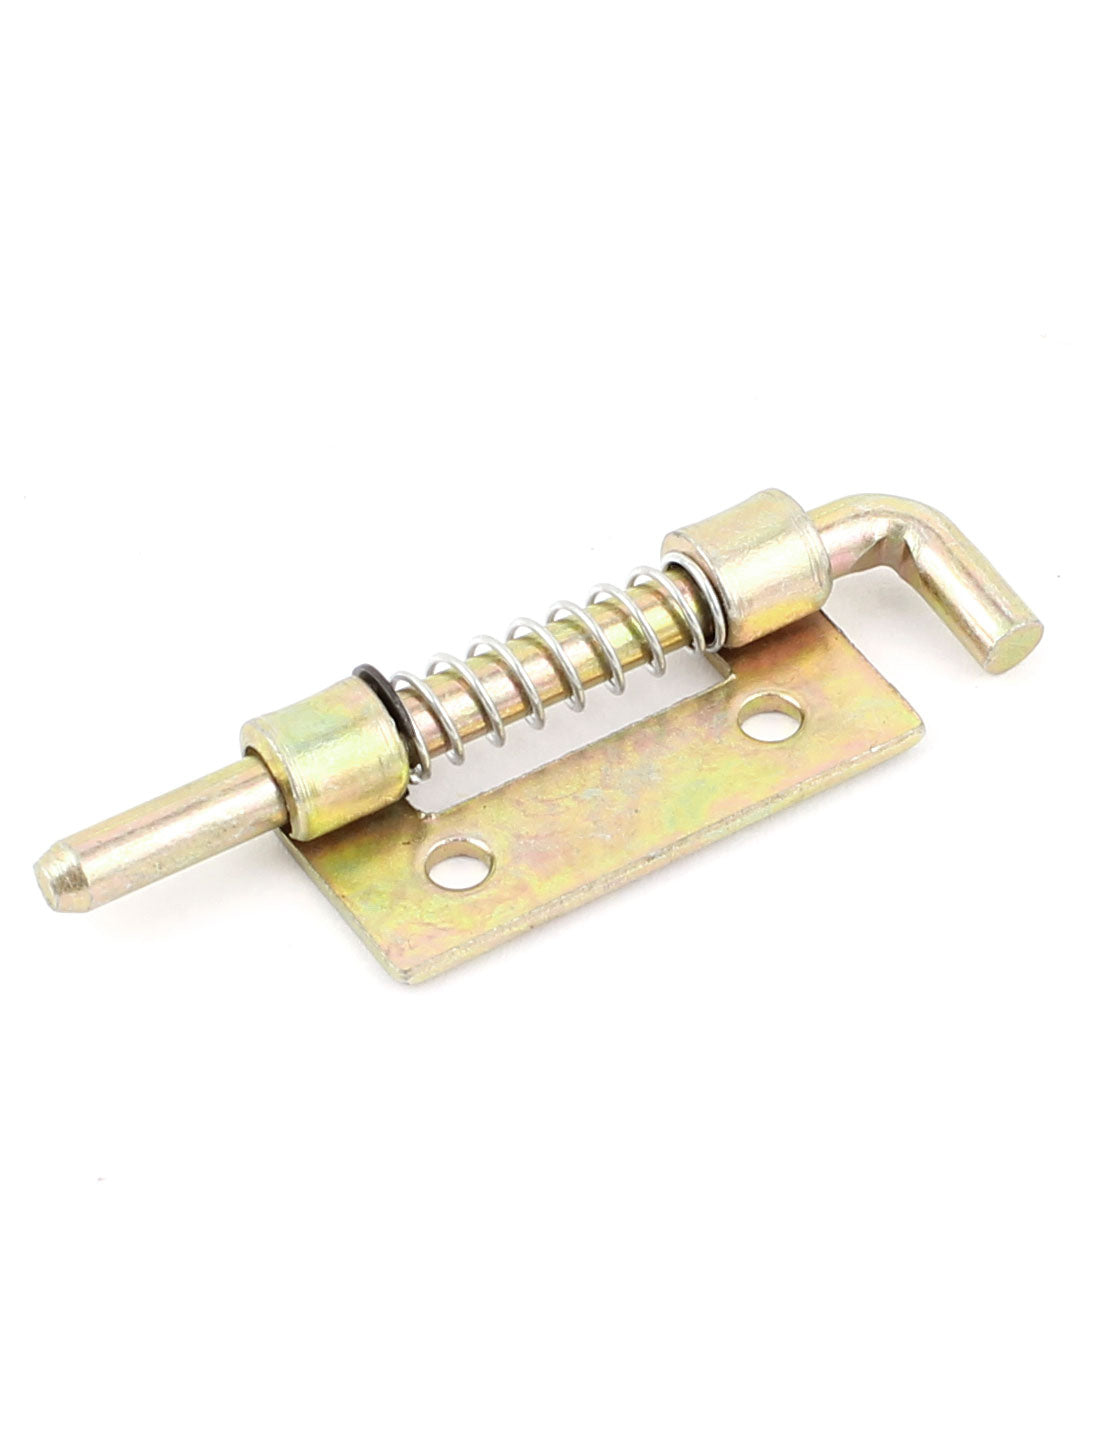 uxcell Uxcell Bathroom Spring Loaded Metal Door Security Bolt Latch 5.5cm Long